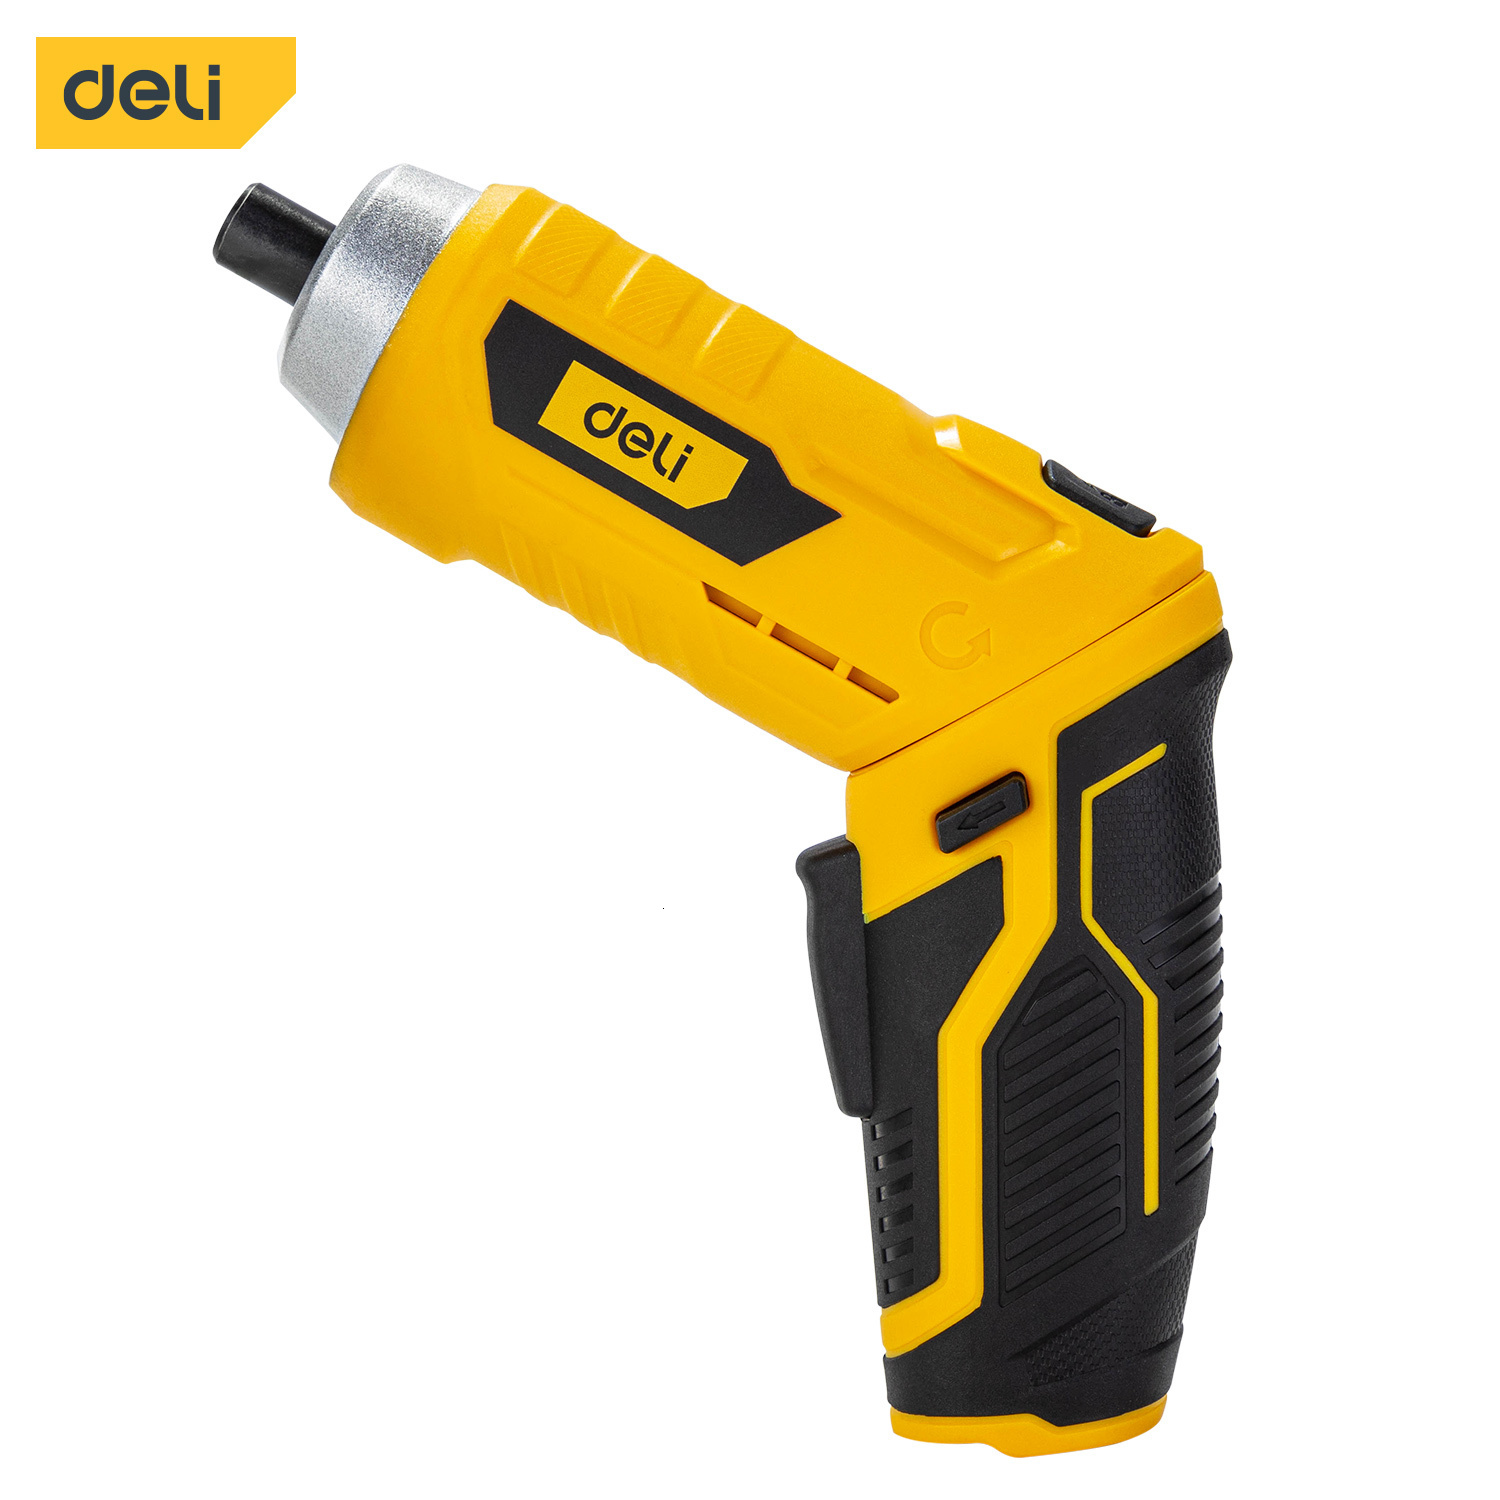 

Electric Screwdriver Deli 3.6V Electric Screwdriver Electric Rechargeable Disassembling Machine Assembly Repair Tool LED Work Light 4-Speed Control 230404